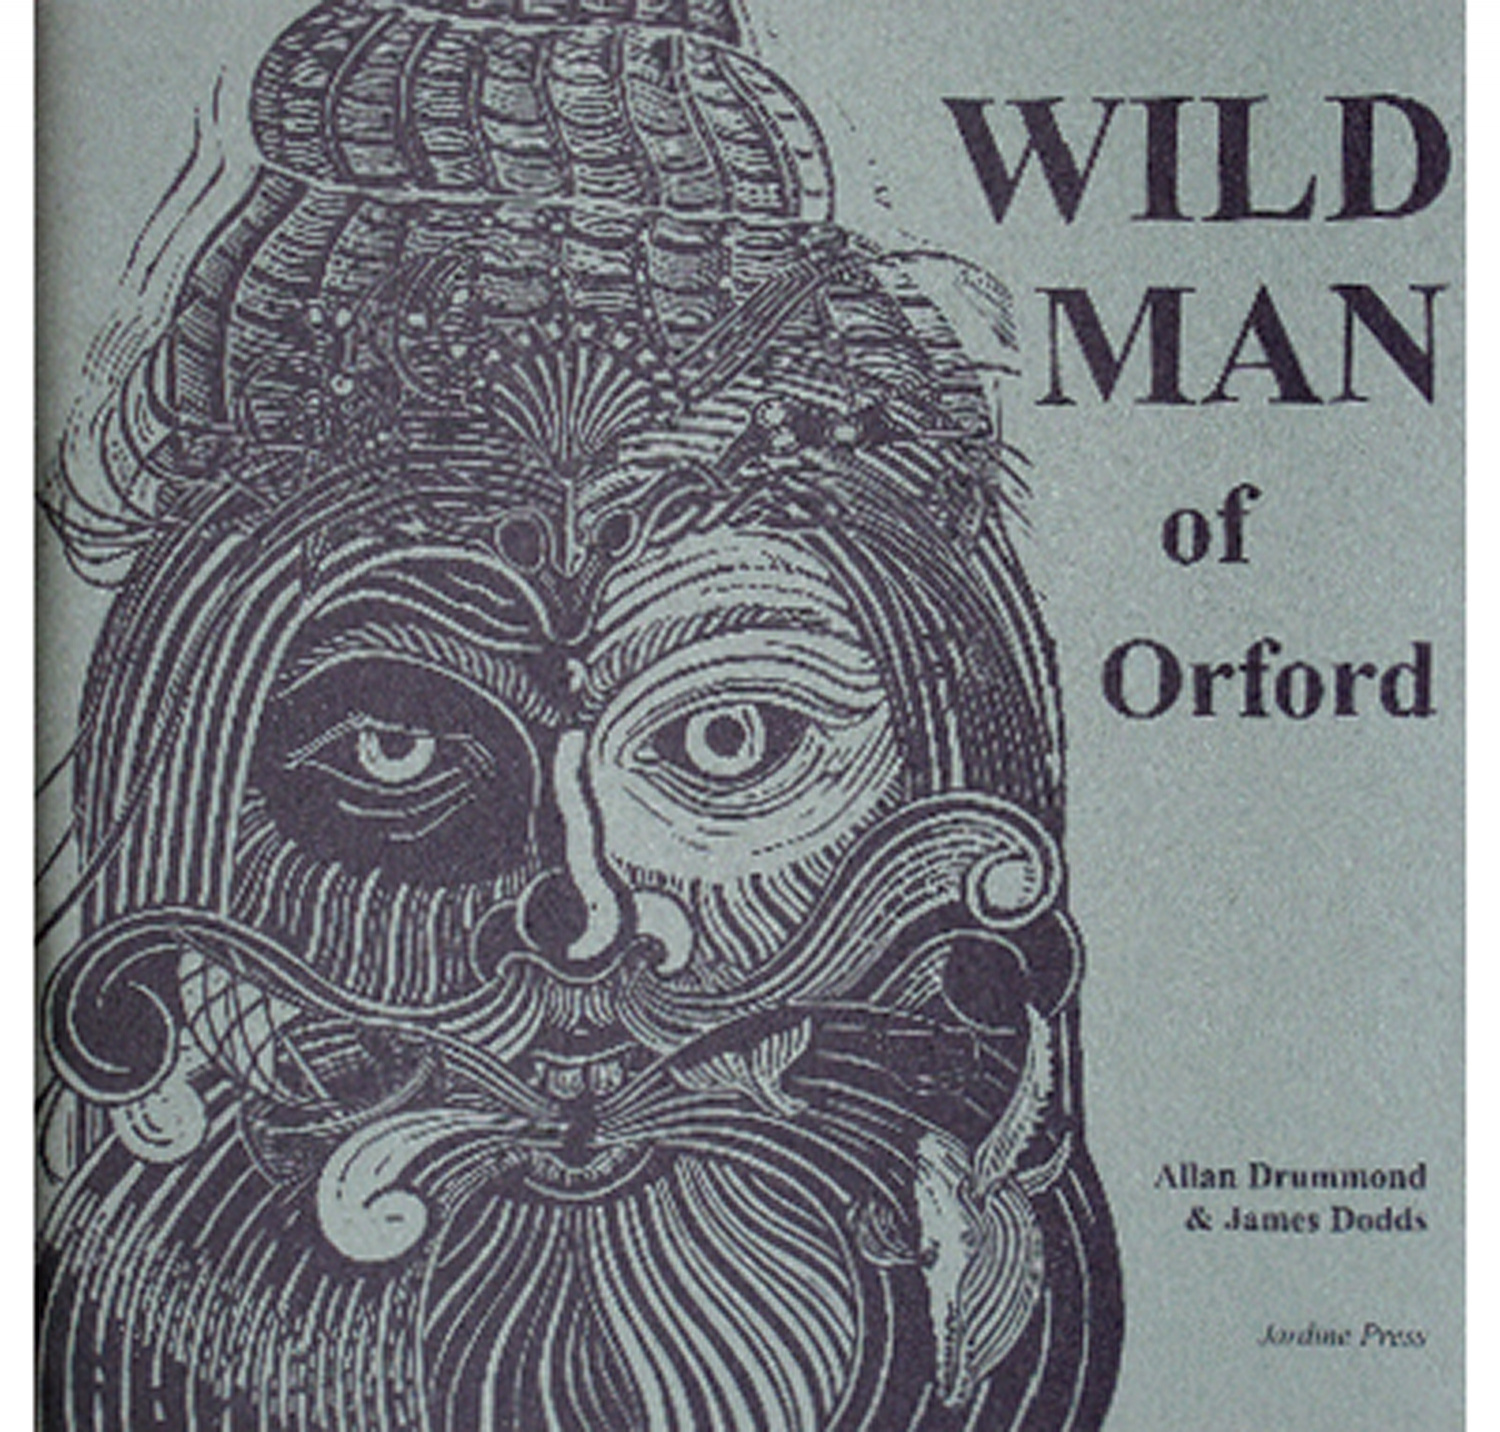 Wild Man of Orford by James Dodds